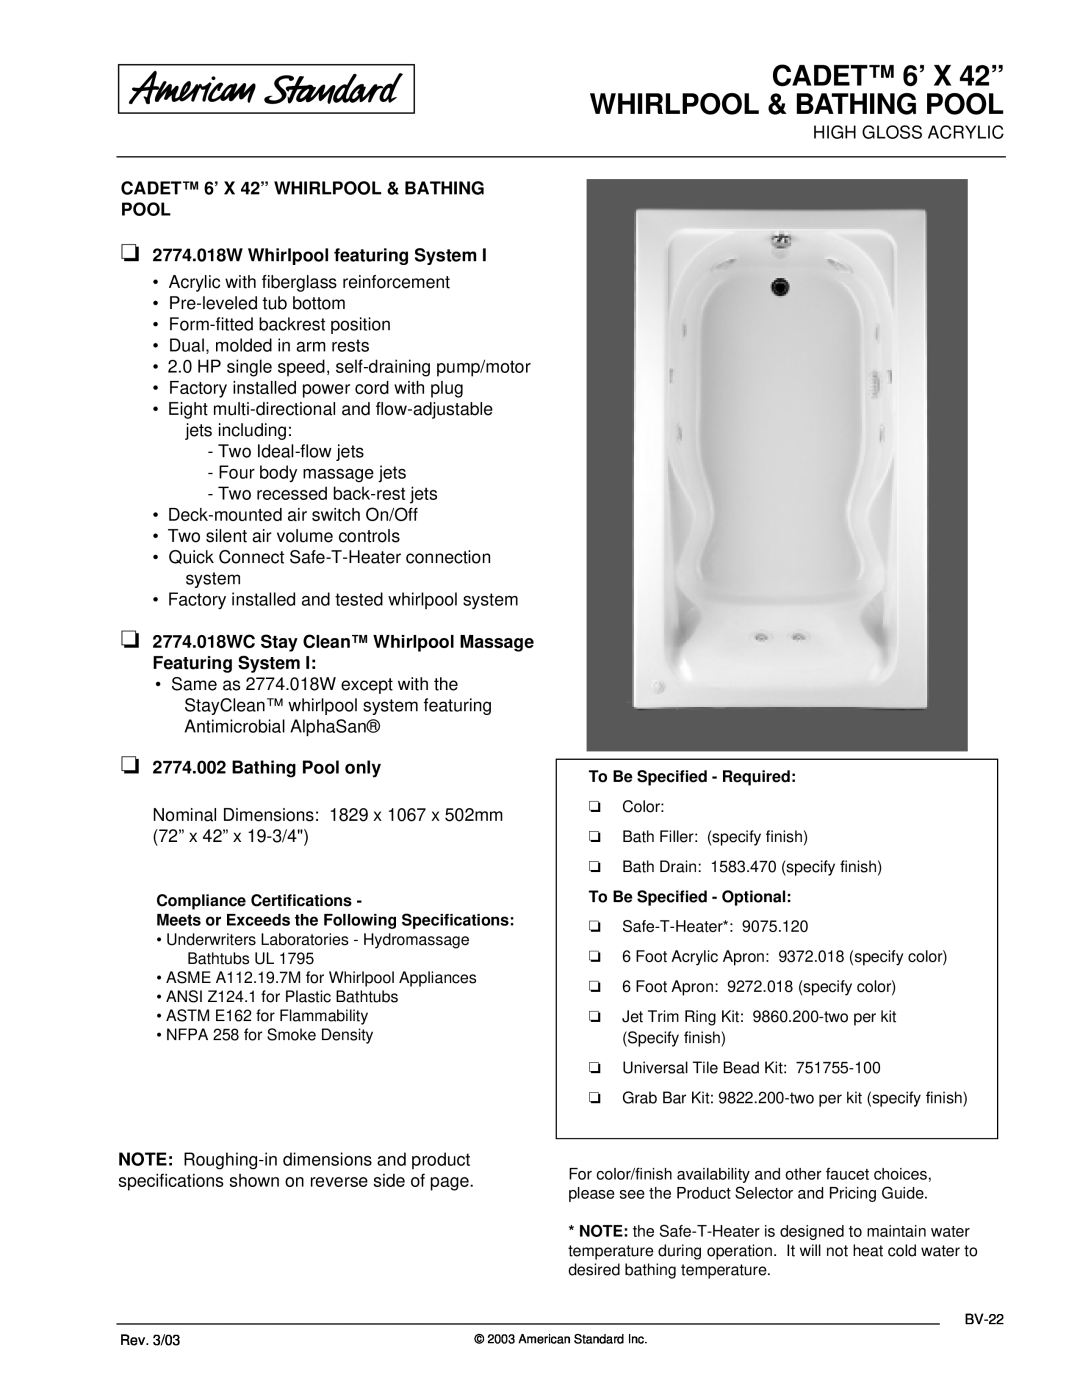 American Standard 2774.018WC dimensions CADET 6’ X 42” WHIRLPOOL & BATHING POOL, 2774.018W Whirlpool featuring System 